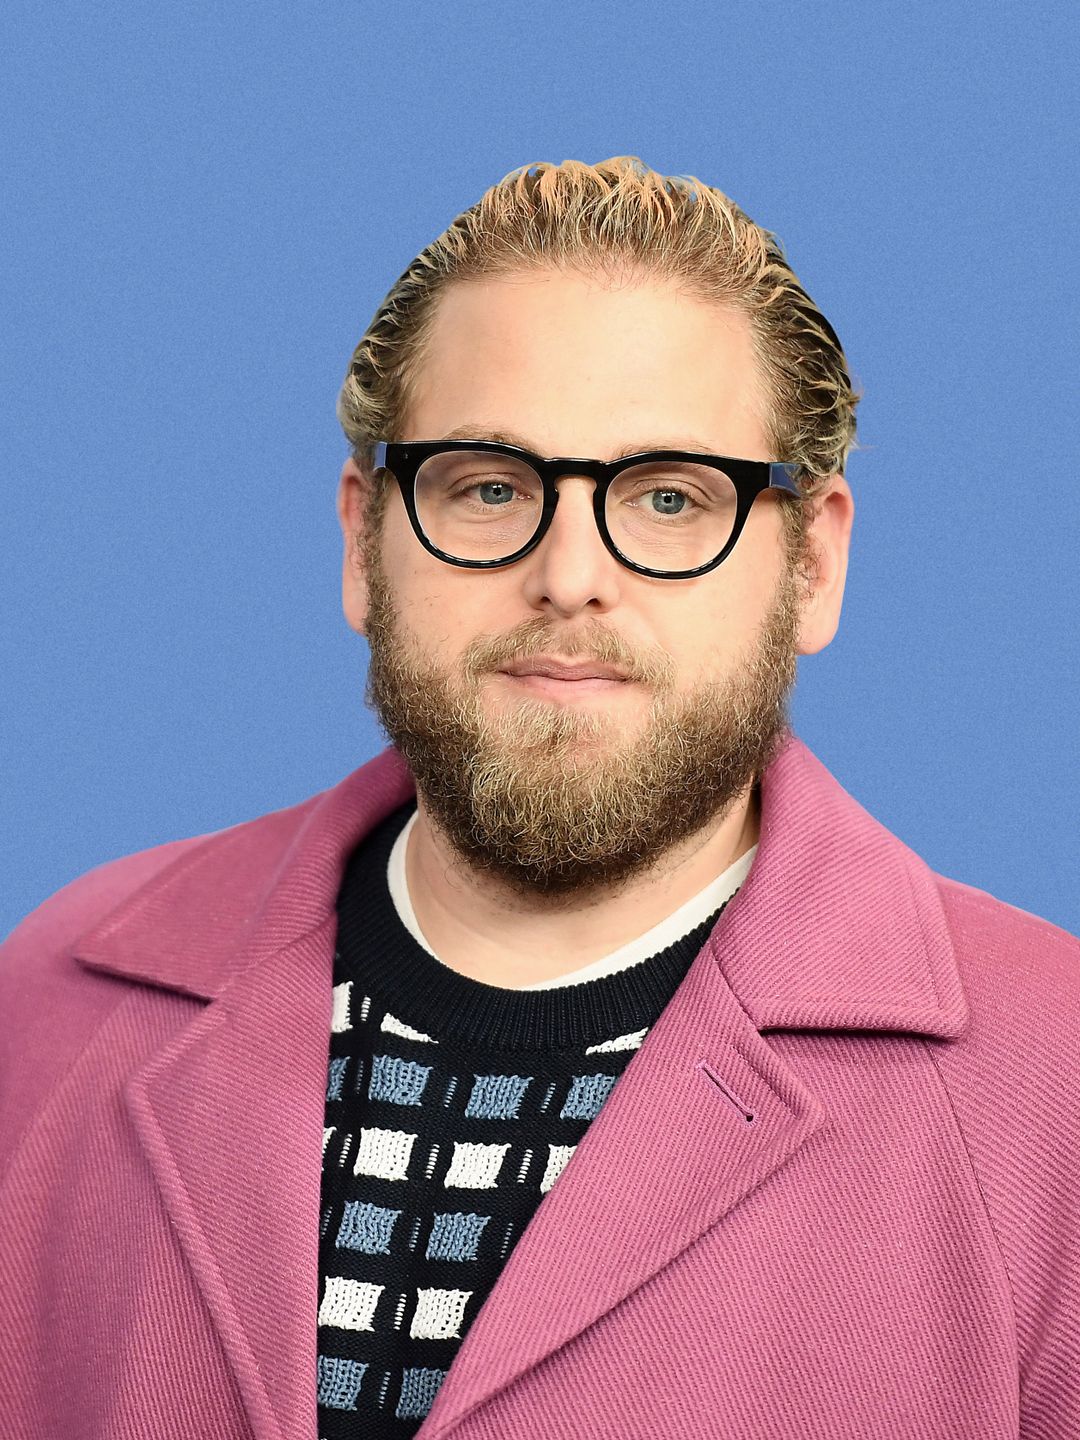 Jonah Hill does he have kids